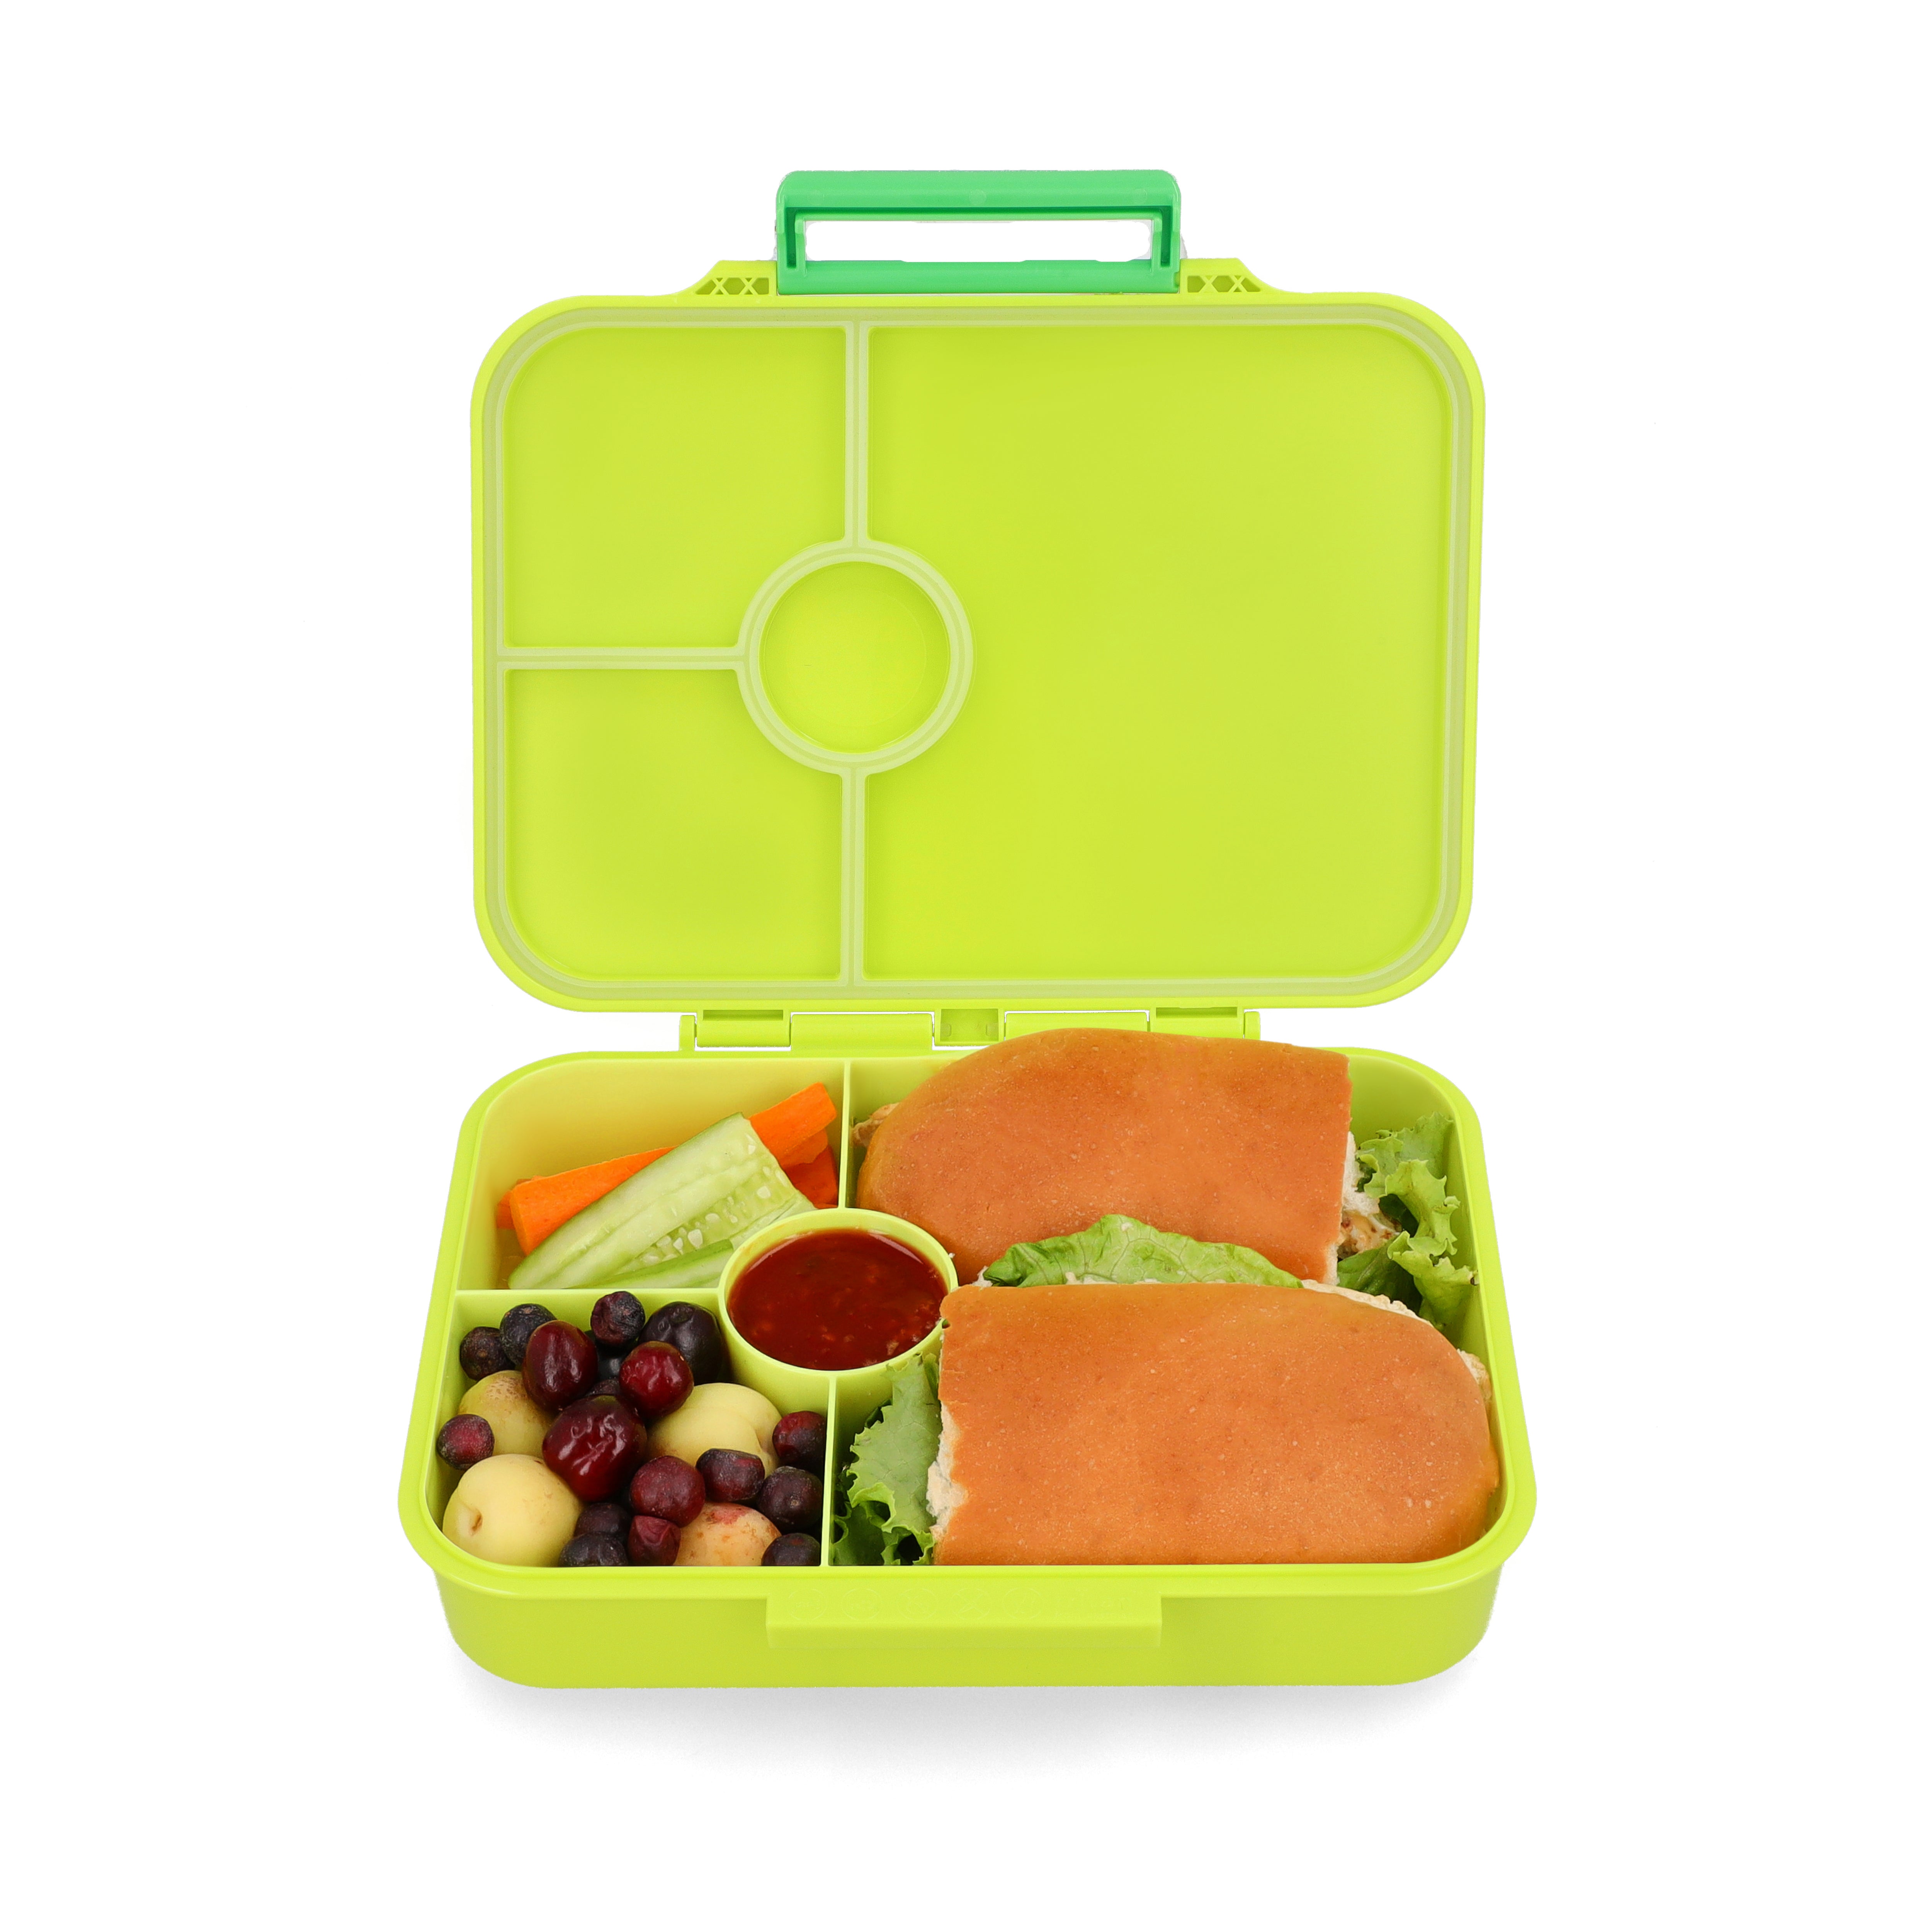 Premium Tritan LeakProof Bento Lunch Box - 4 or 5 Compartments - Lime Green - Dinosaurs